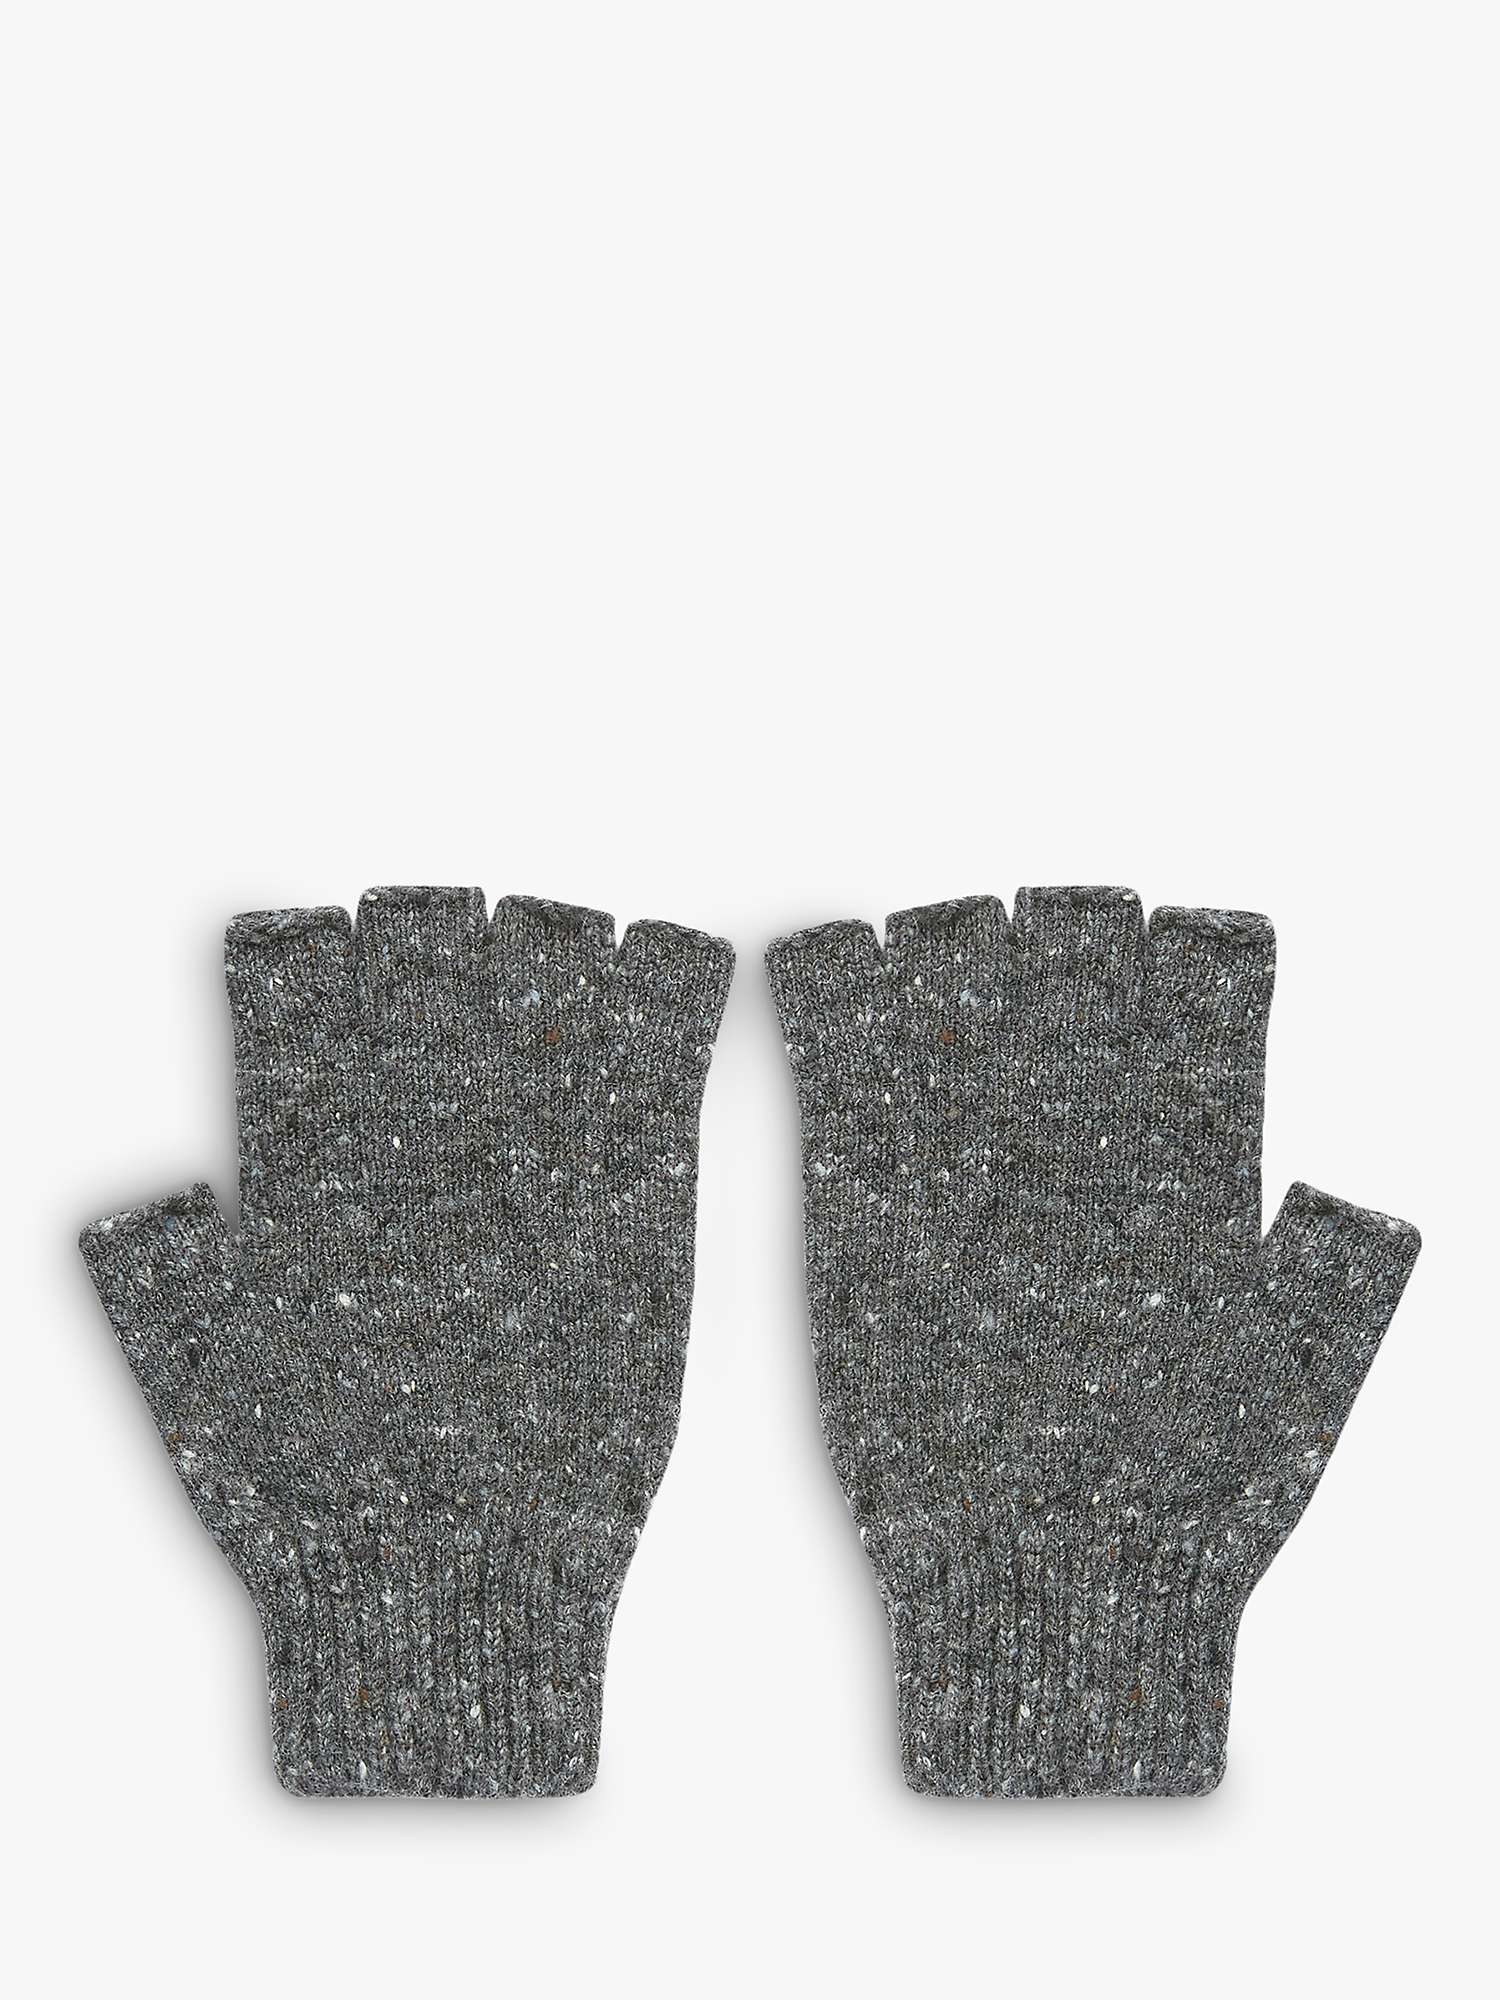 Buy Celtic & Co. Unisex Donegal Lambswool Gloves, Charcoal Online at johnlewis.com